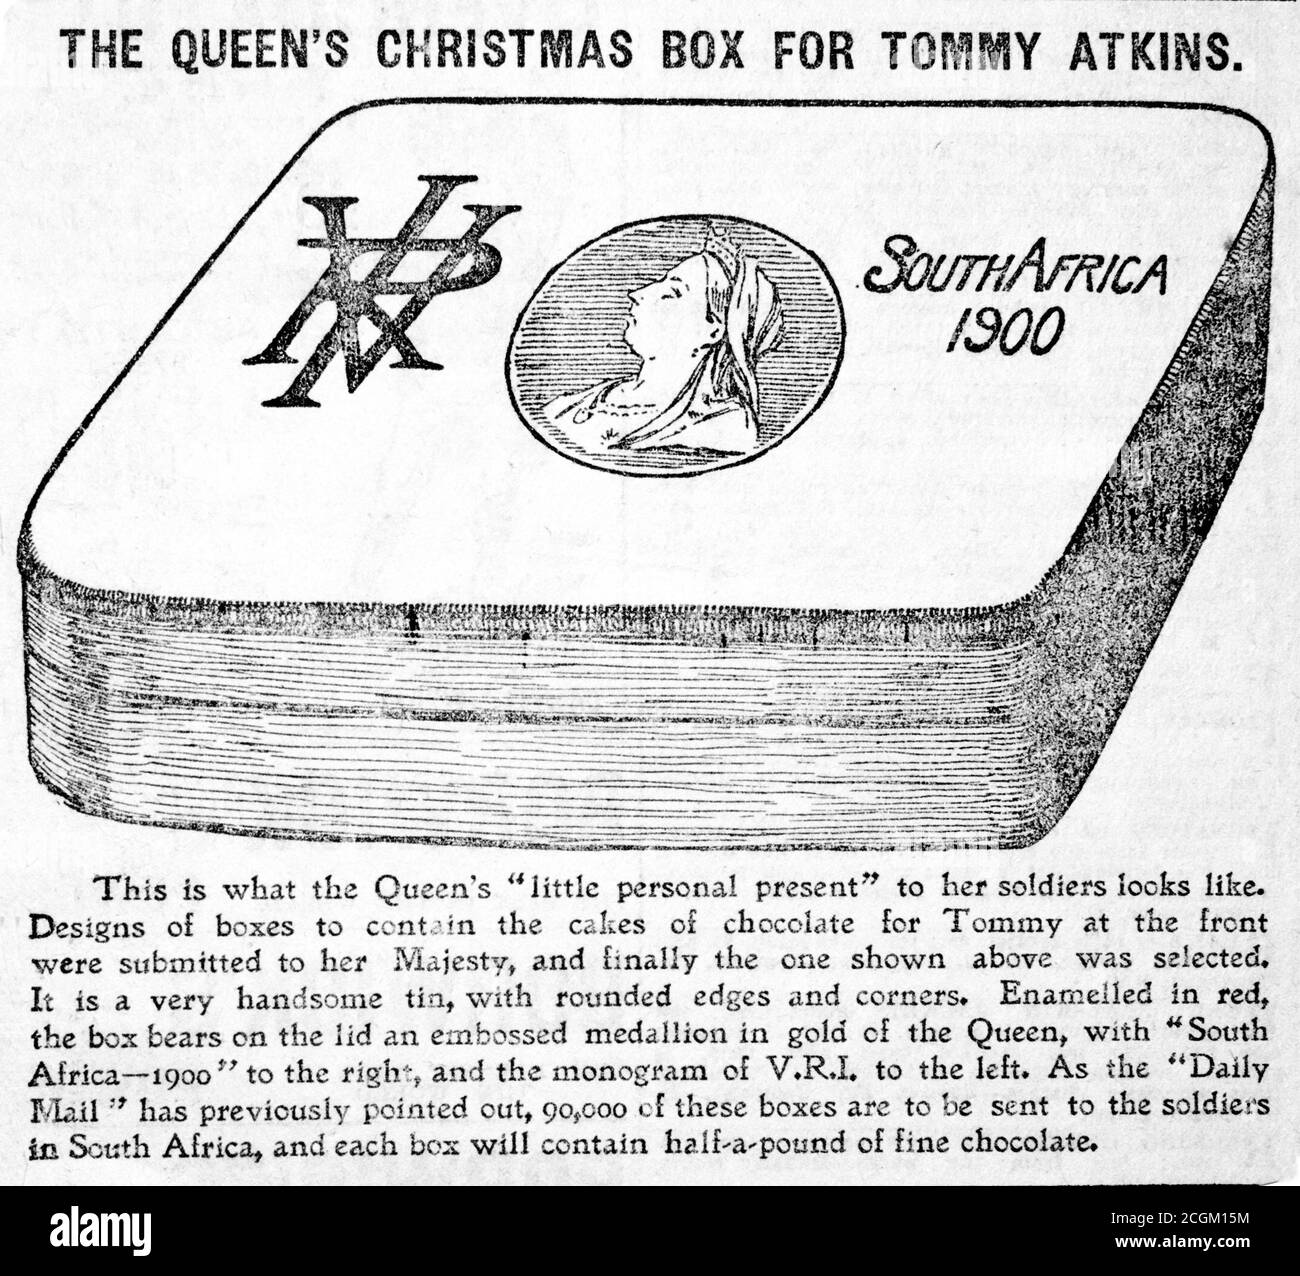 A historical contemporary newspaper cutting 'The Queen's Christmas Box for Tommy Atkins' from the Daily Mail c.1899 with a description. The illustration shows the then proposed Christmas box to be sent out to solidiers serving in the Second Boer War. Stock Photo